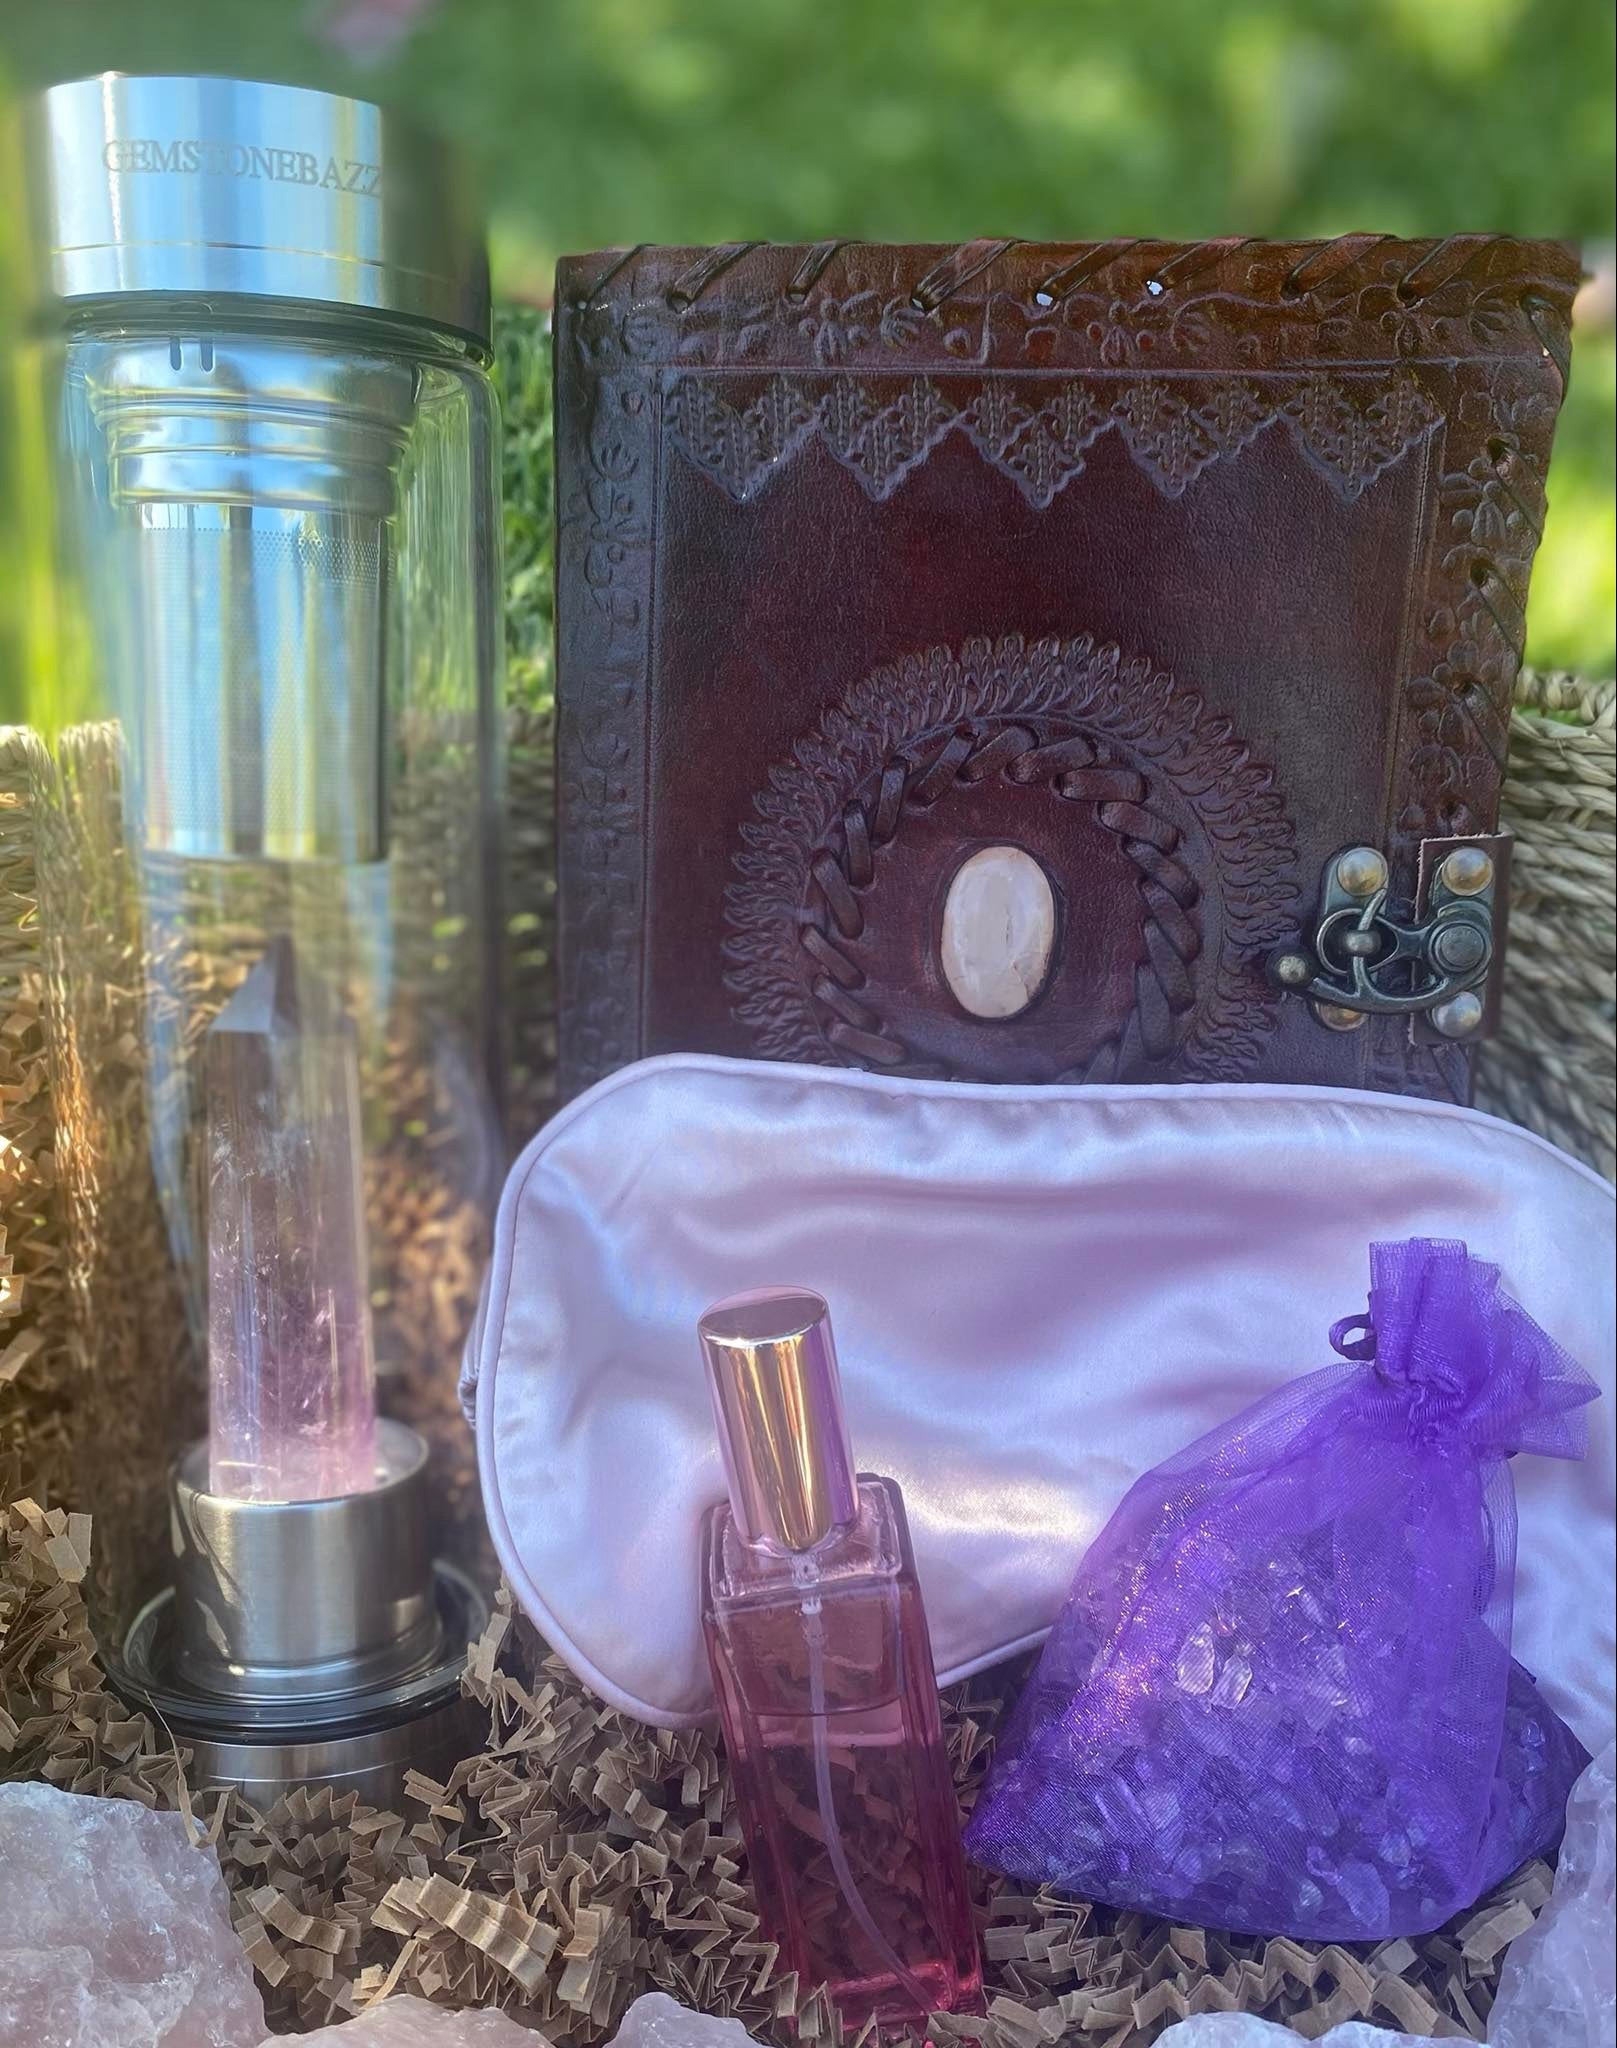 Daily Ritual Tool Kit for good habits and crystal energy healing